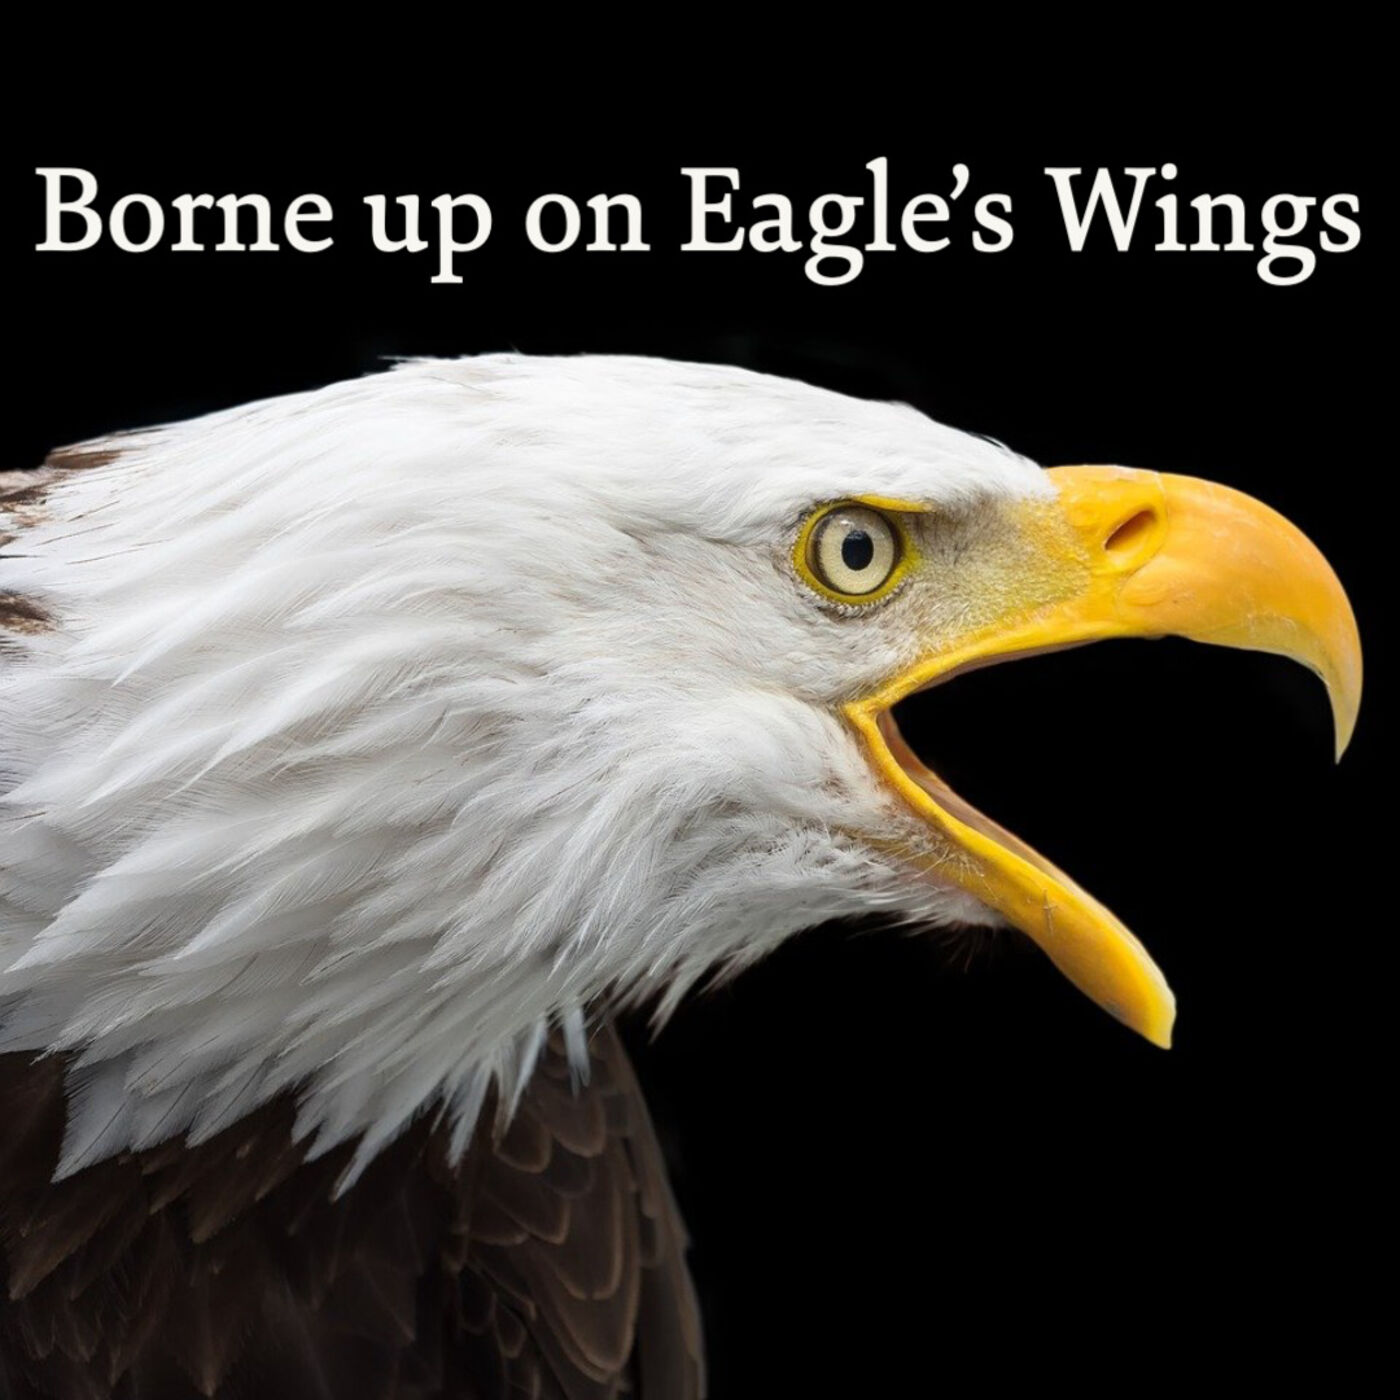 Borne Up on Eagle's Wings